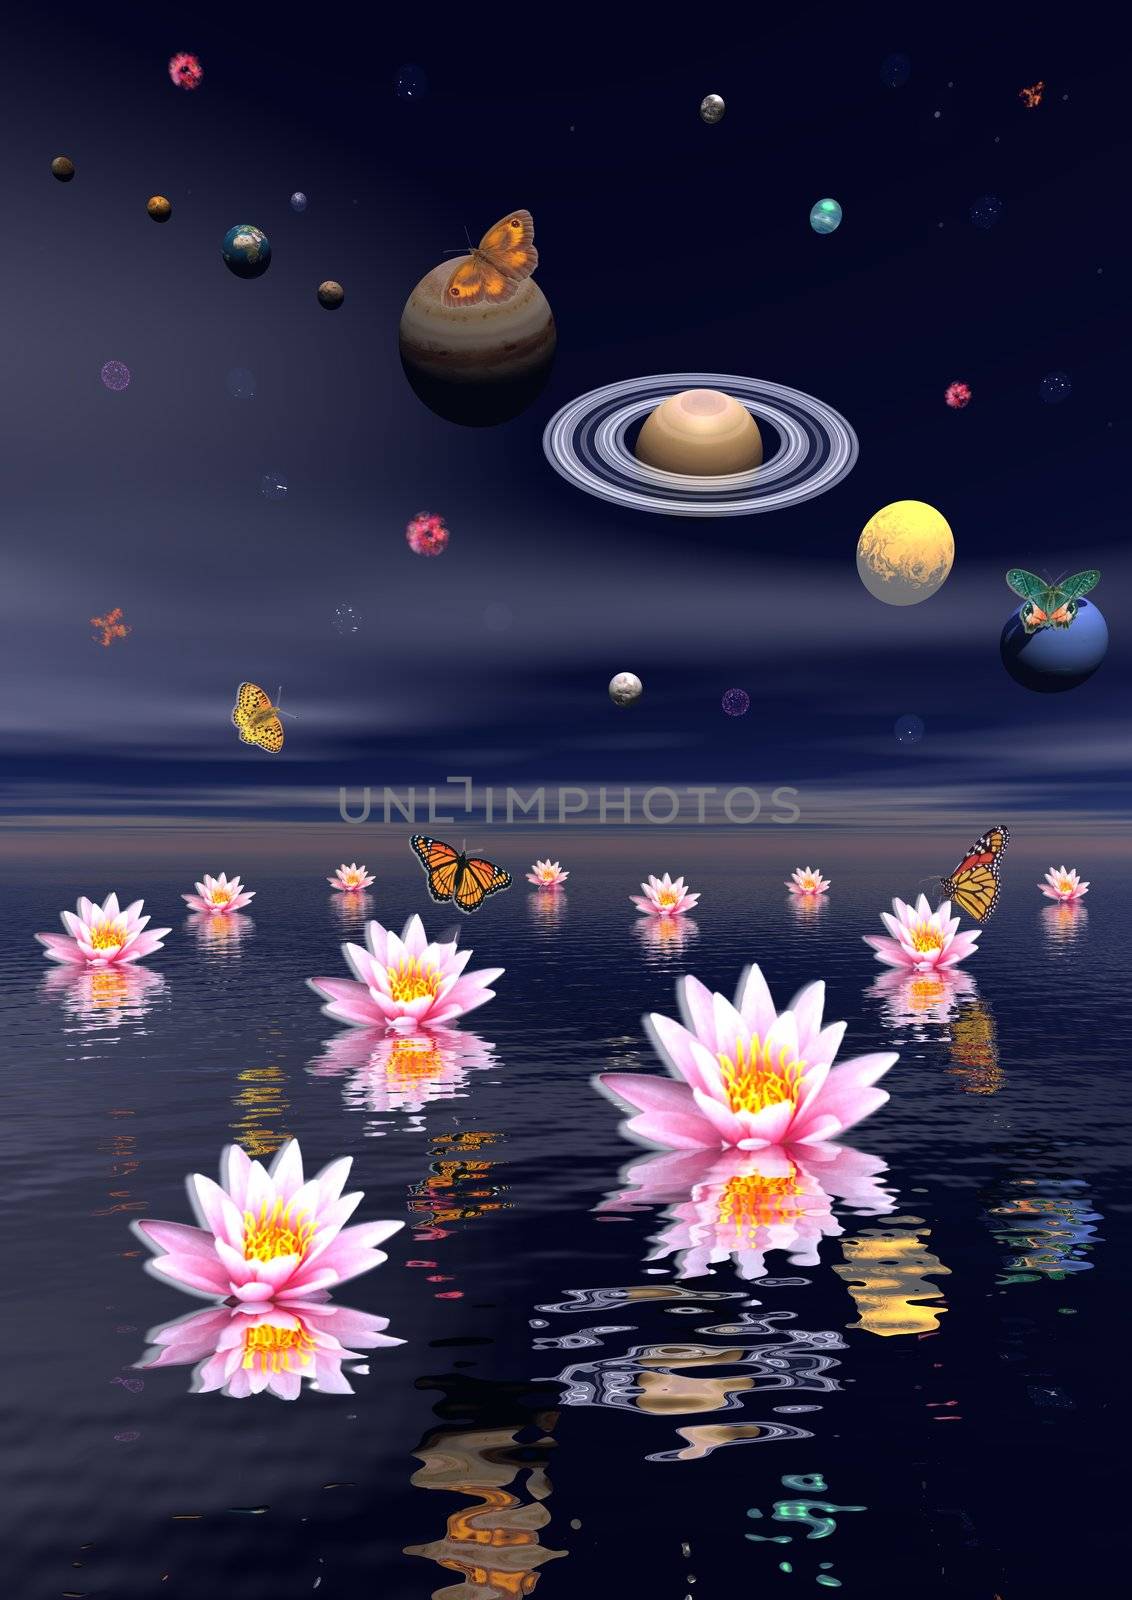 Planets of the solar system surrounded by several nebulas, planets and flying butterflies upon the ocean covered with lotus flower